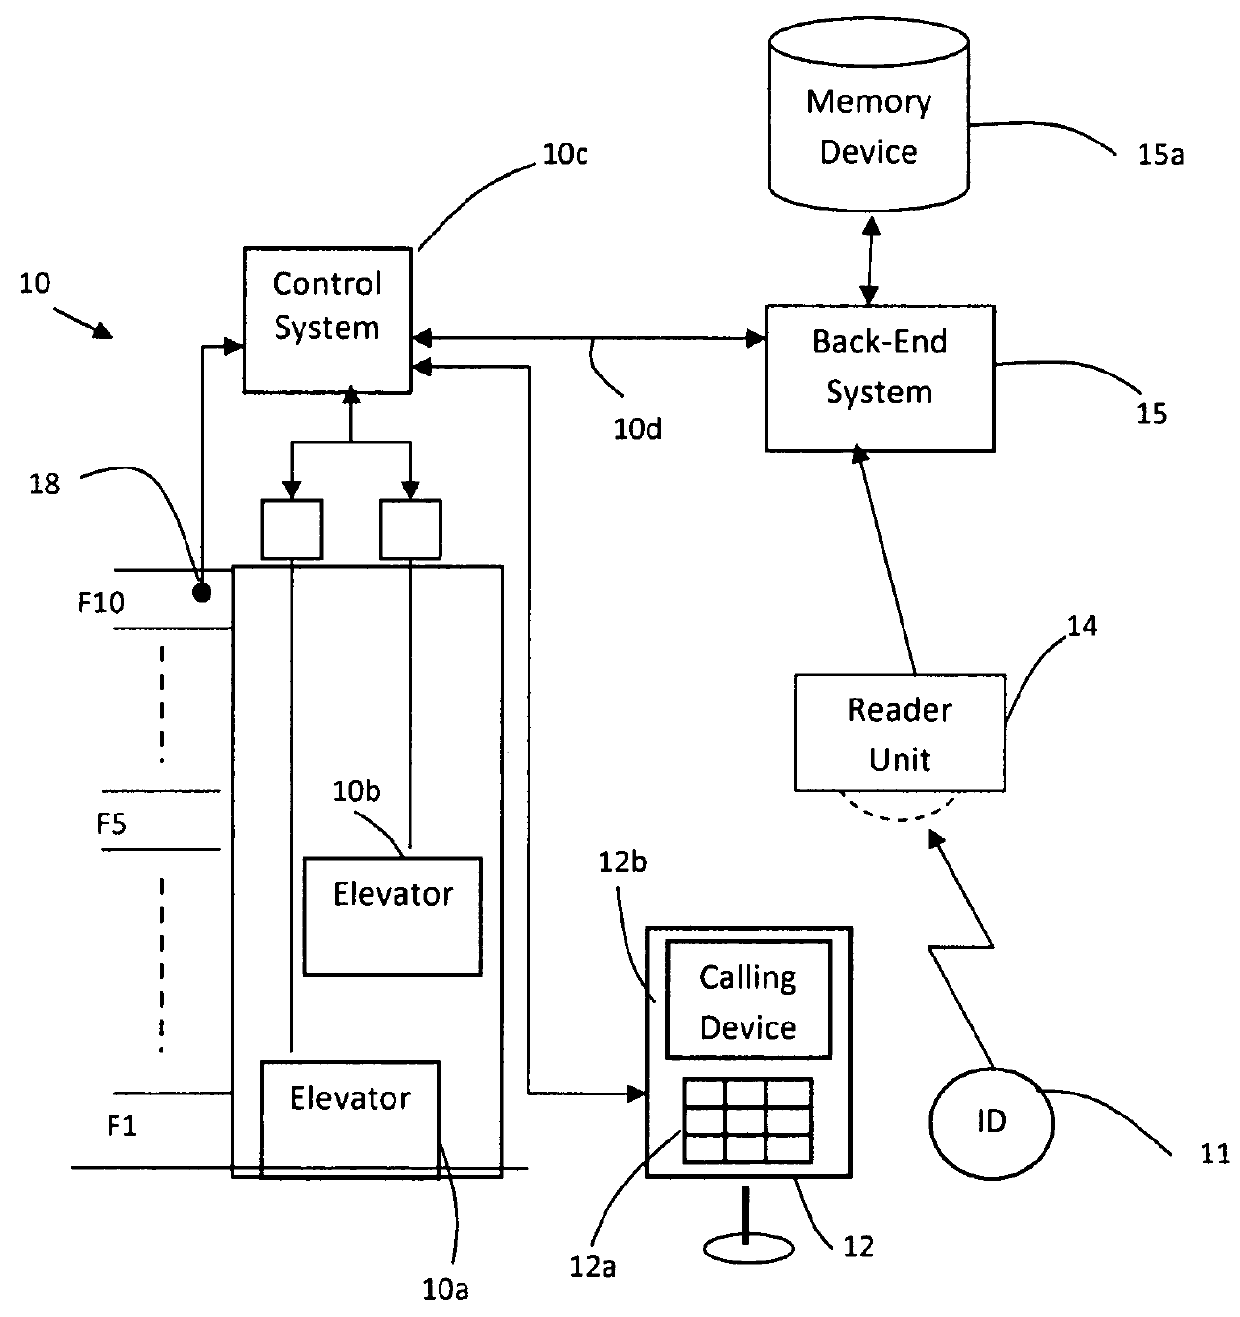 Elevator system for generating automatic elevator calls using a personal identifier